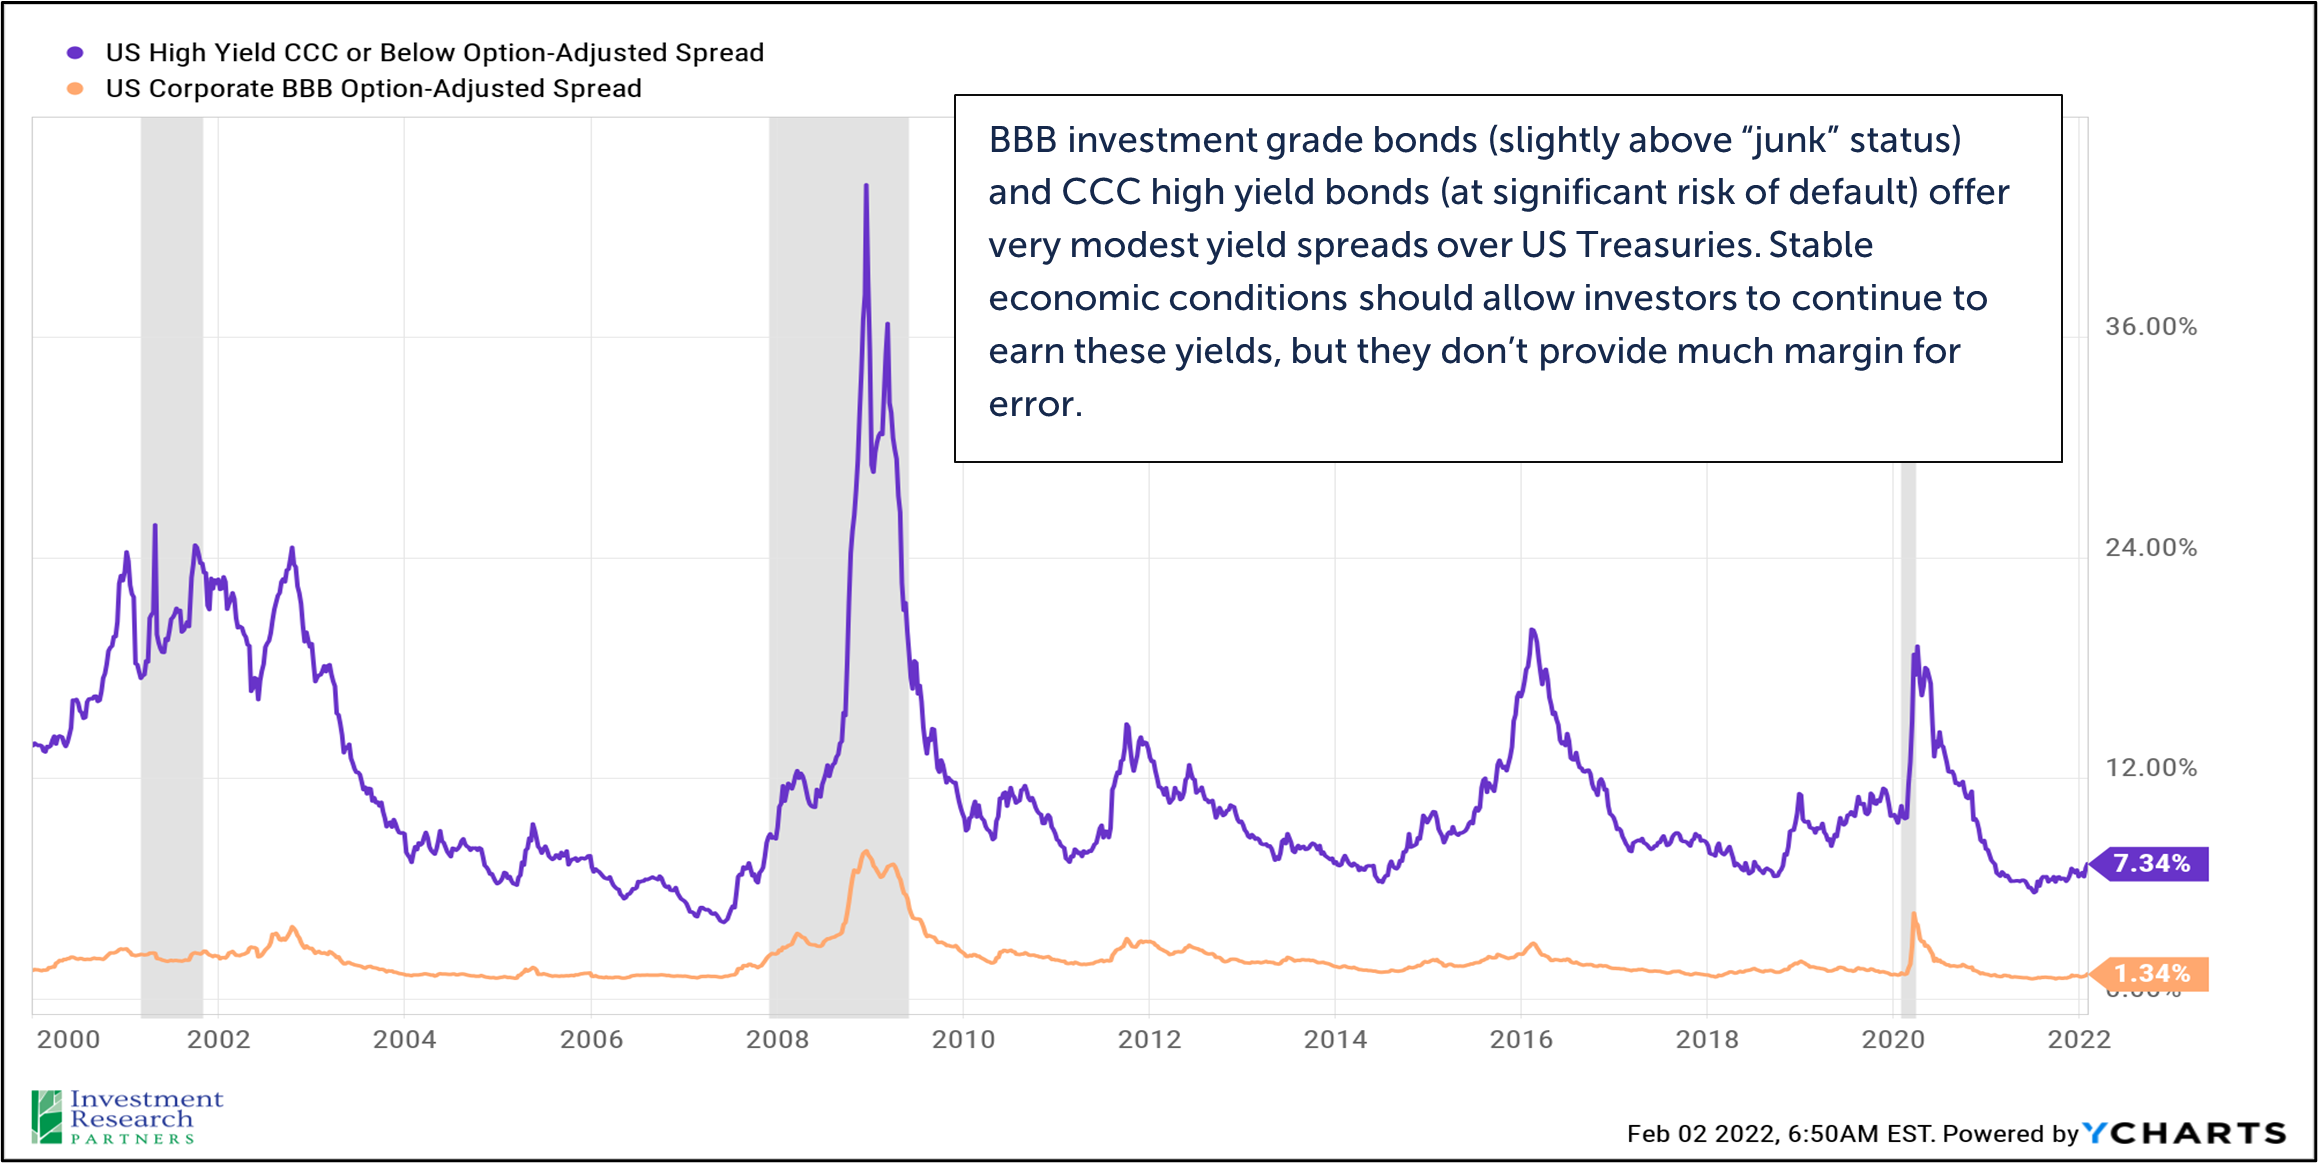 Line graphs depicting US High Yield CCC or Below Option-Adjusted Spread and US Corporate BBB Option-Adjusted Spread